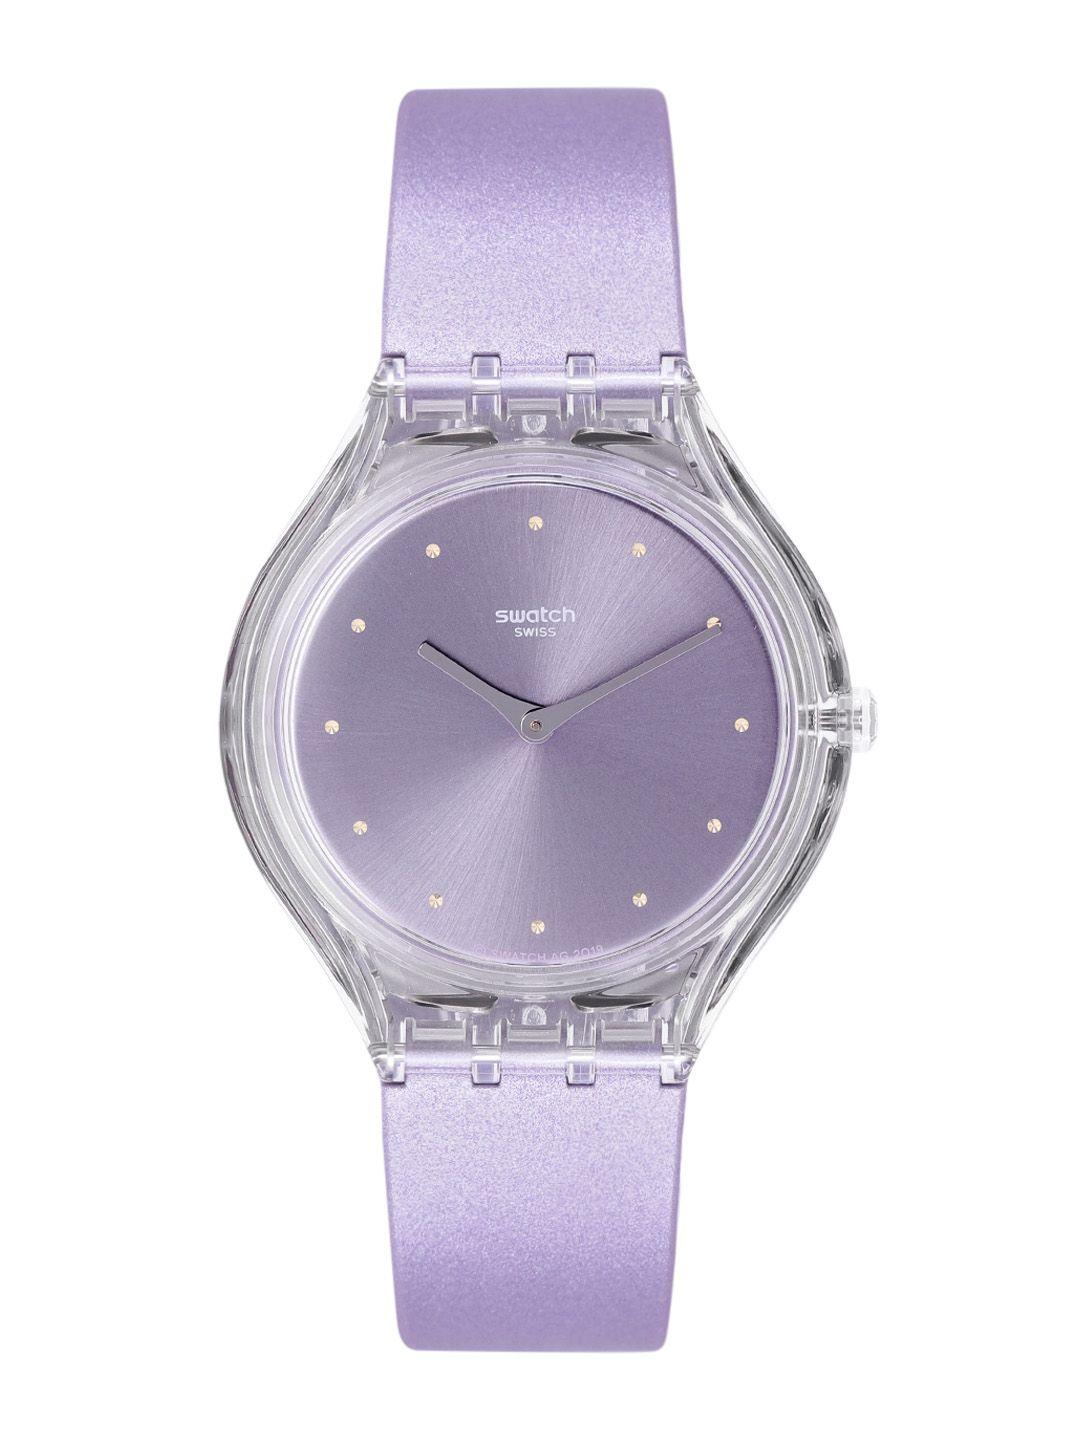 swatch unisex lavender water resistant analogue swiss made watch svok110